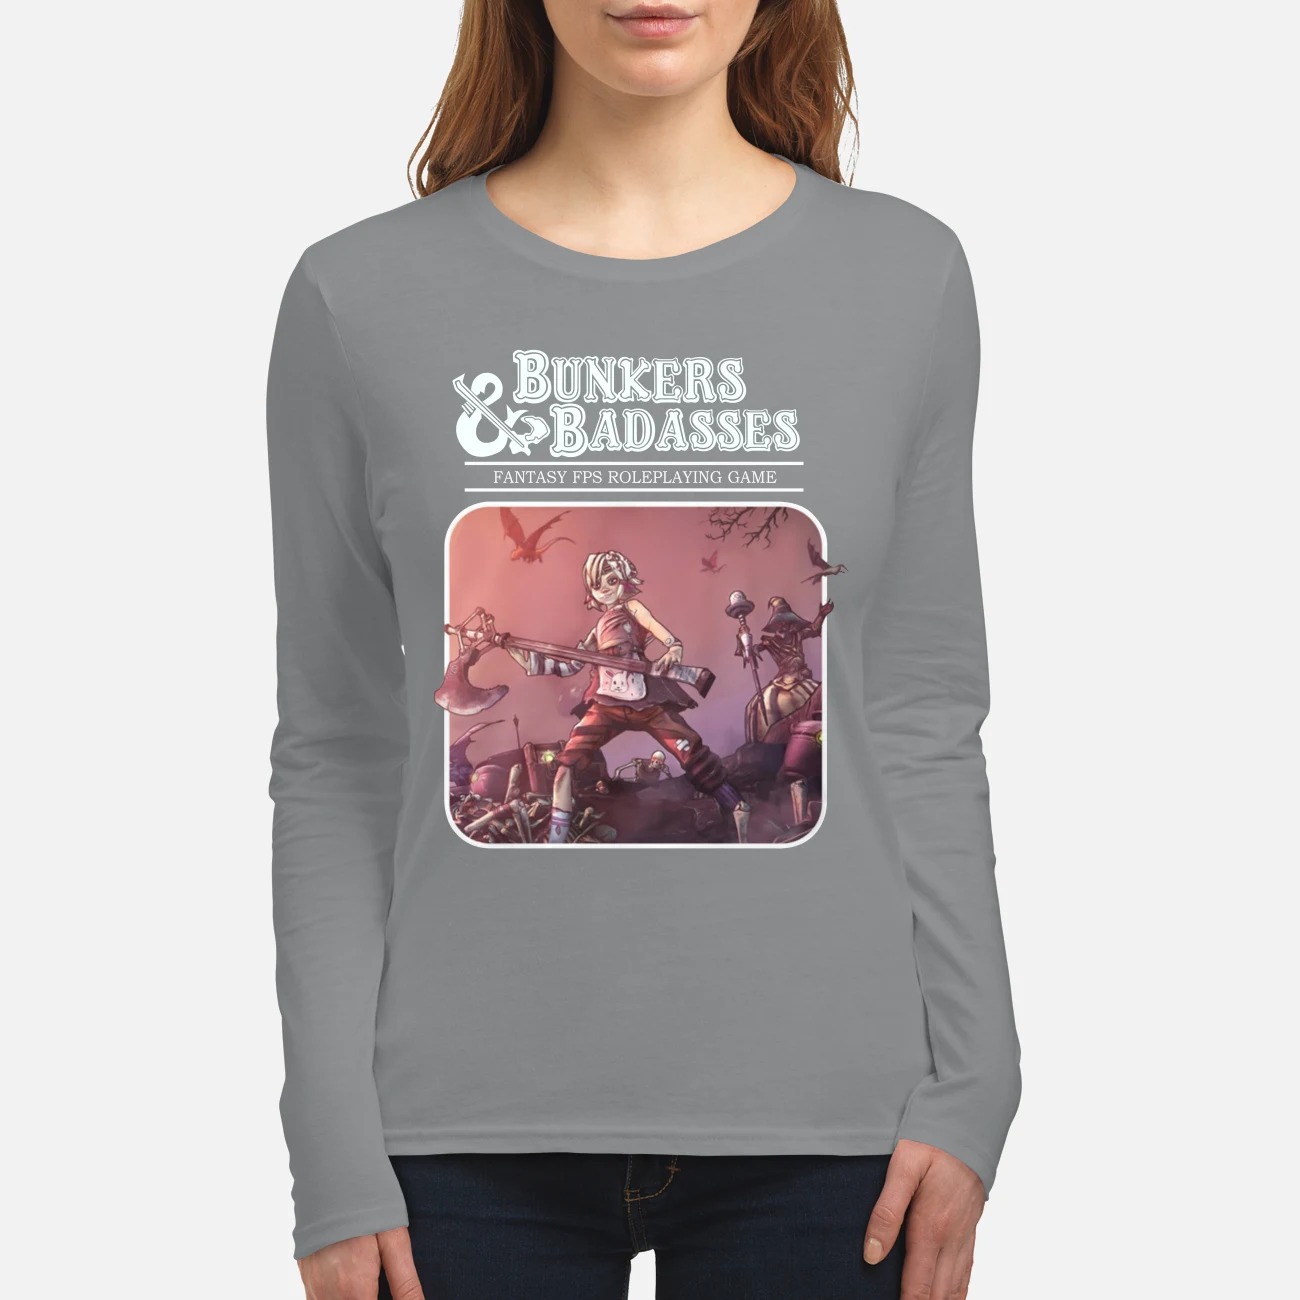 Bunkers and badasses fantasy fps game women's long sleeved shirt